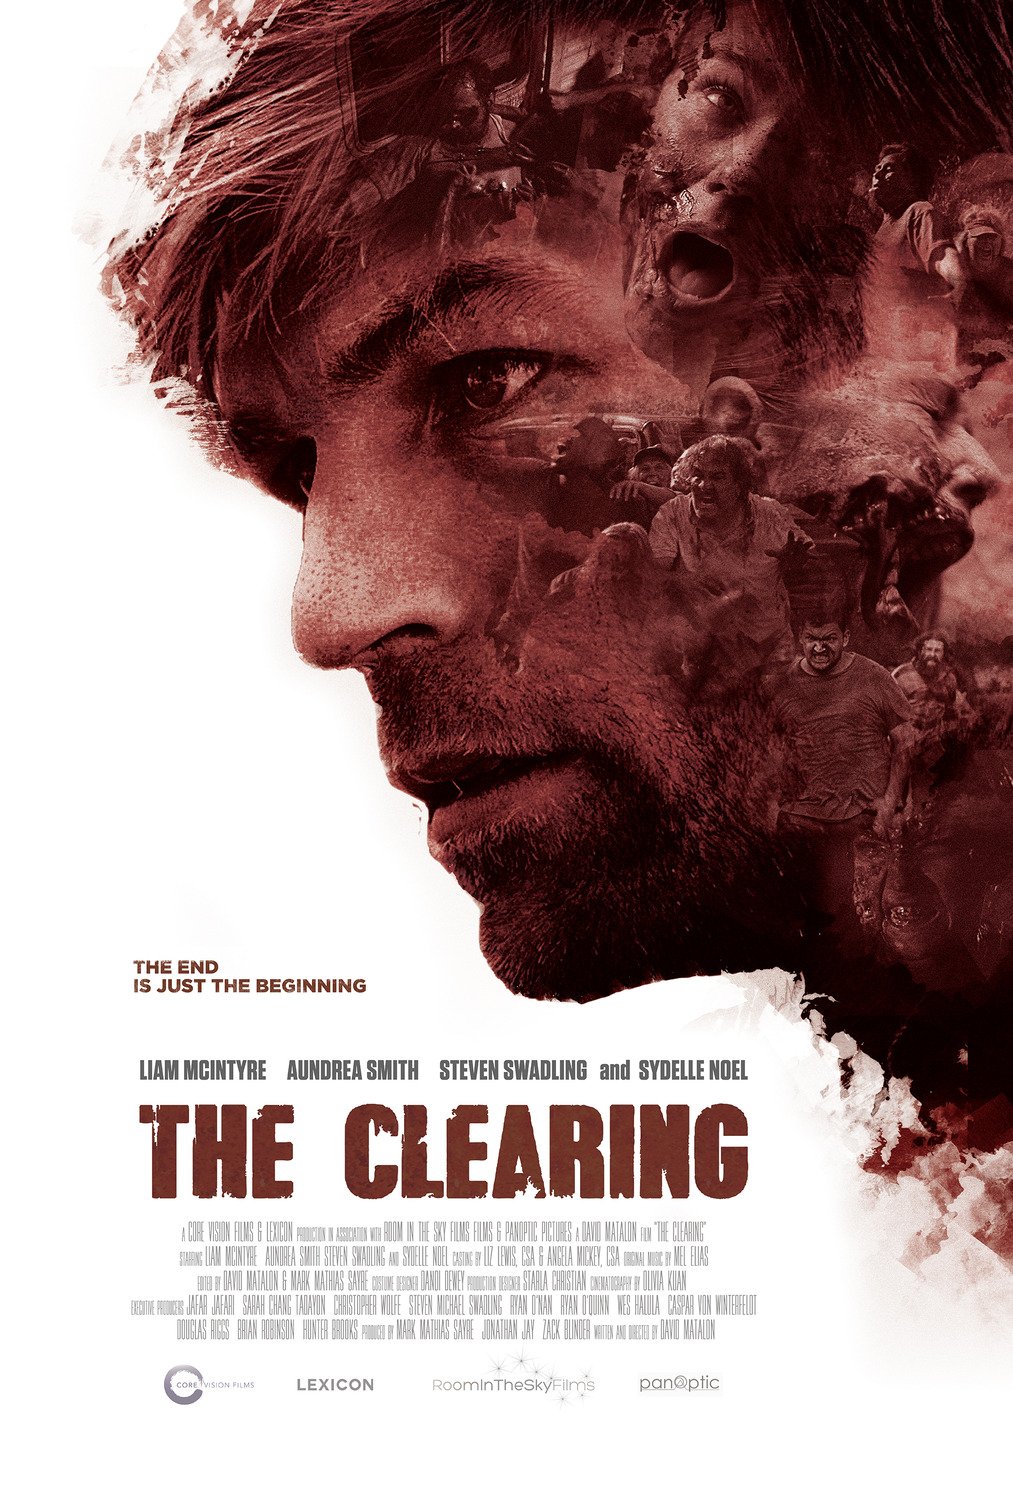 The Clearing : Affiche